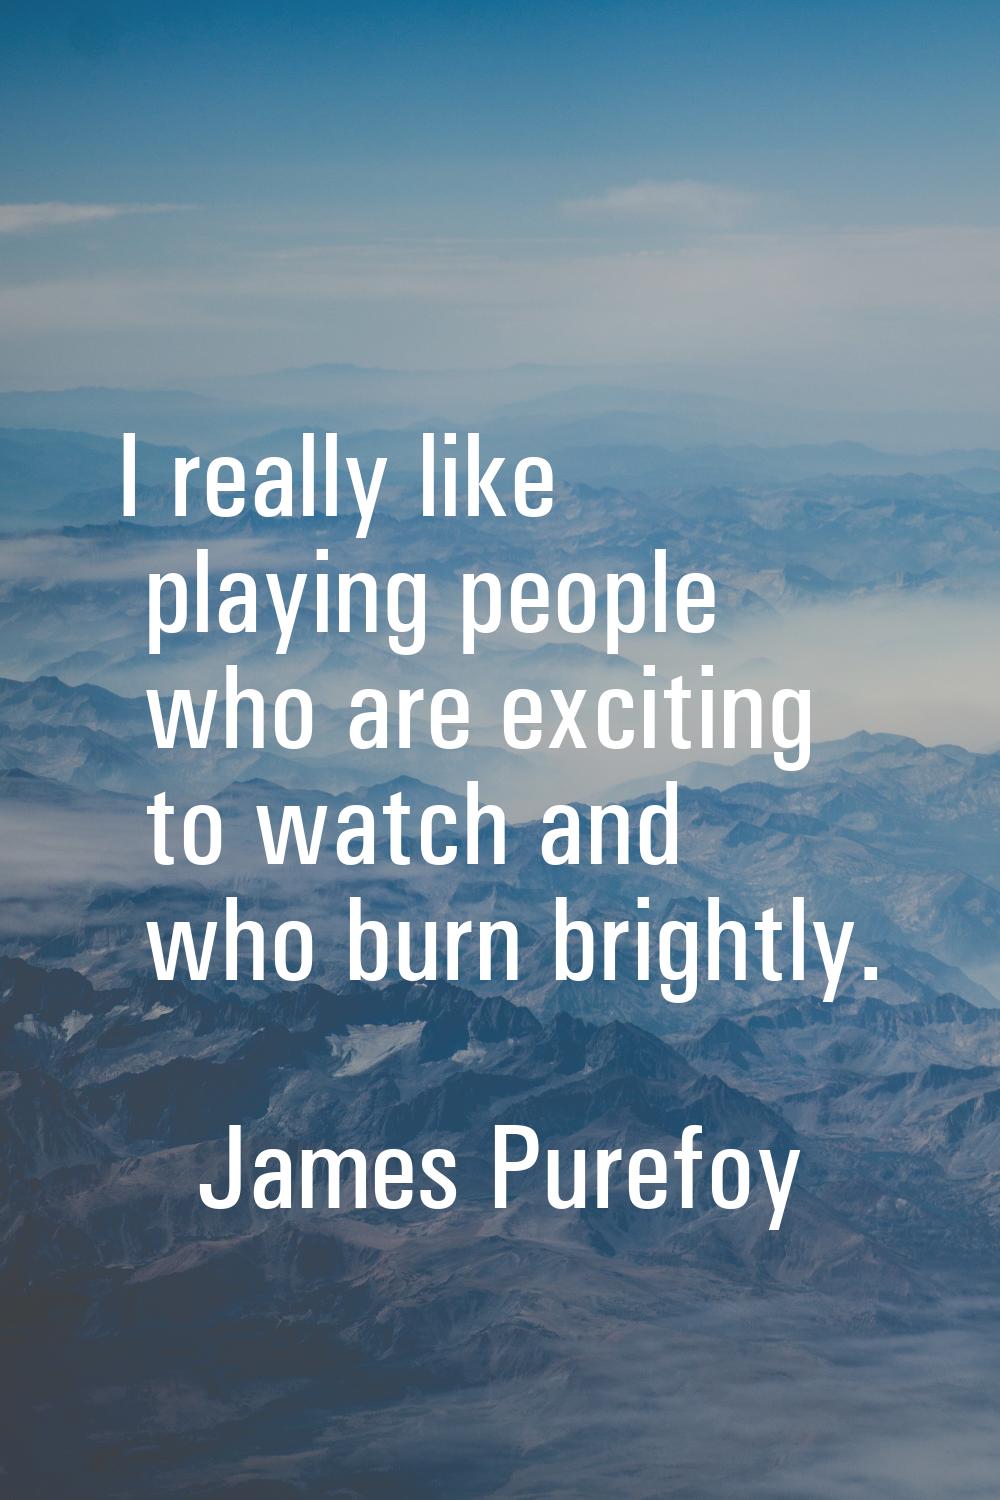 I really like playing people who are exciting to watch and who burn brightly.